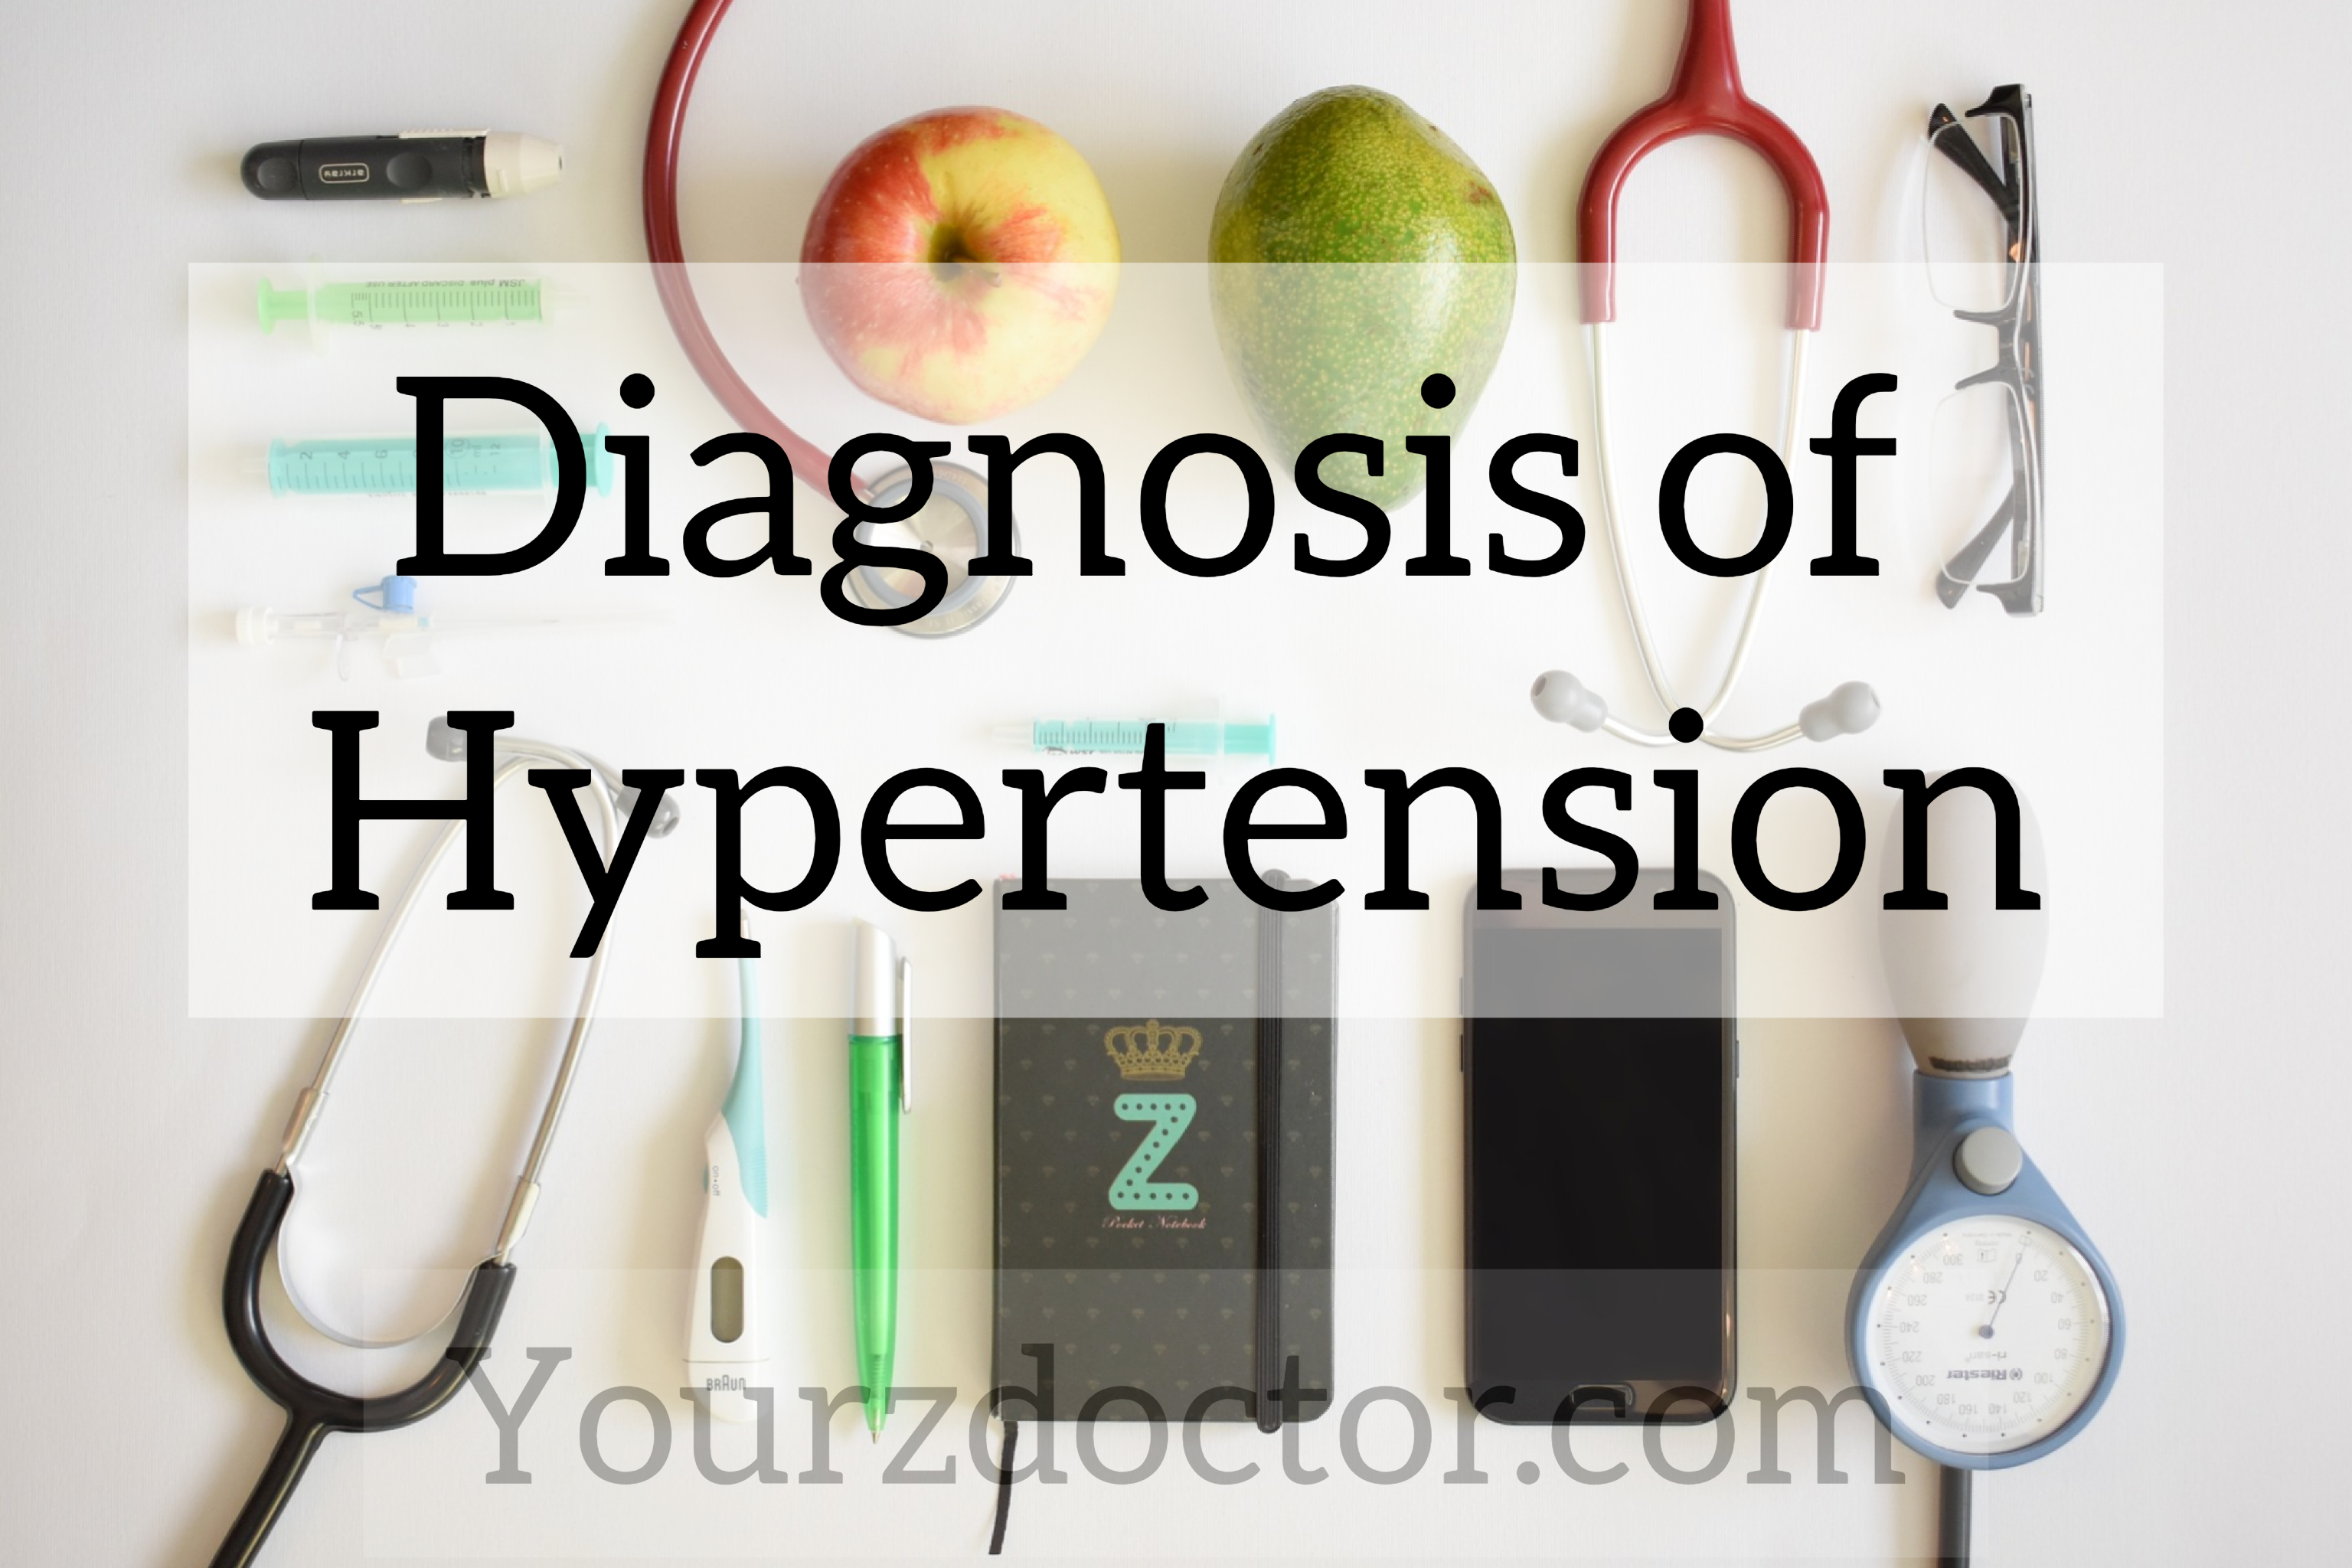 Diagnosis of hypertension